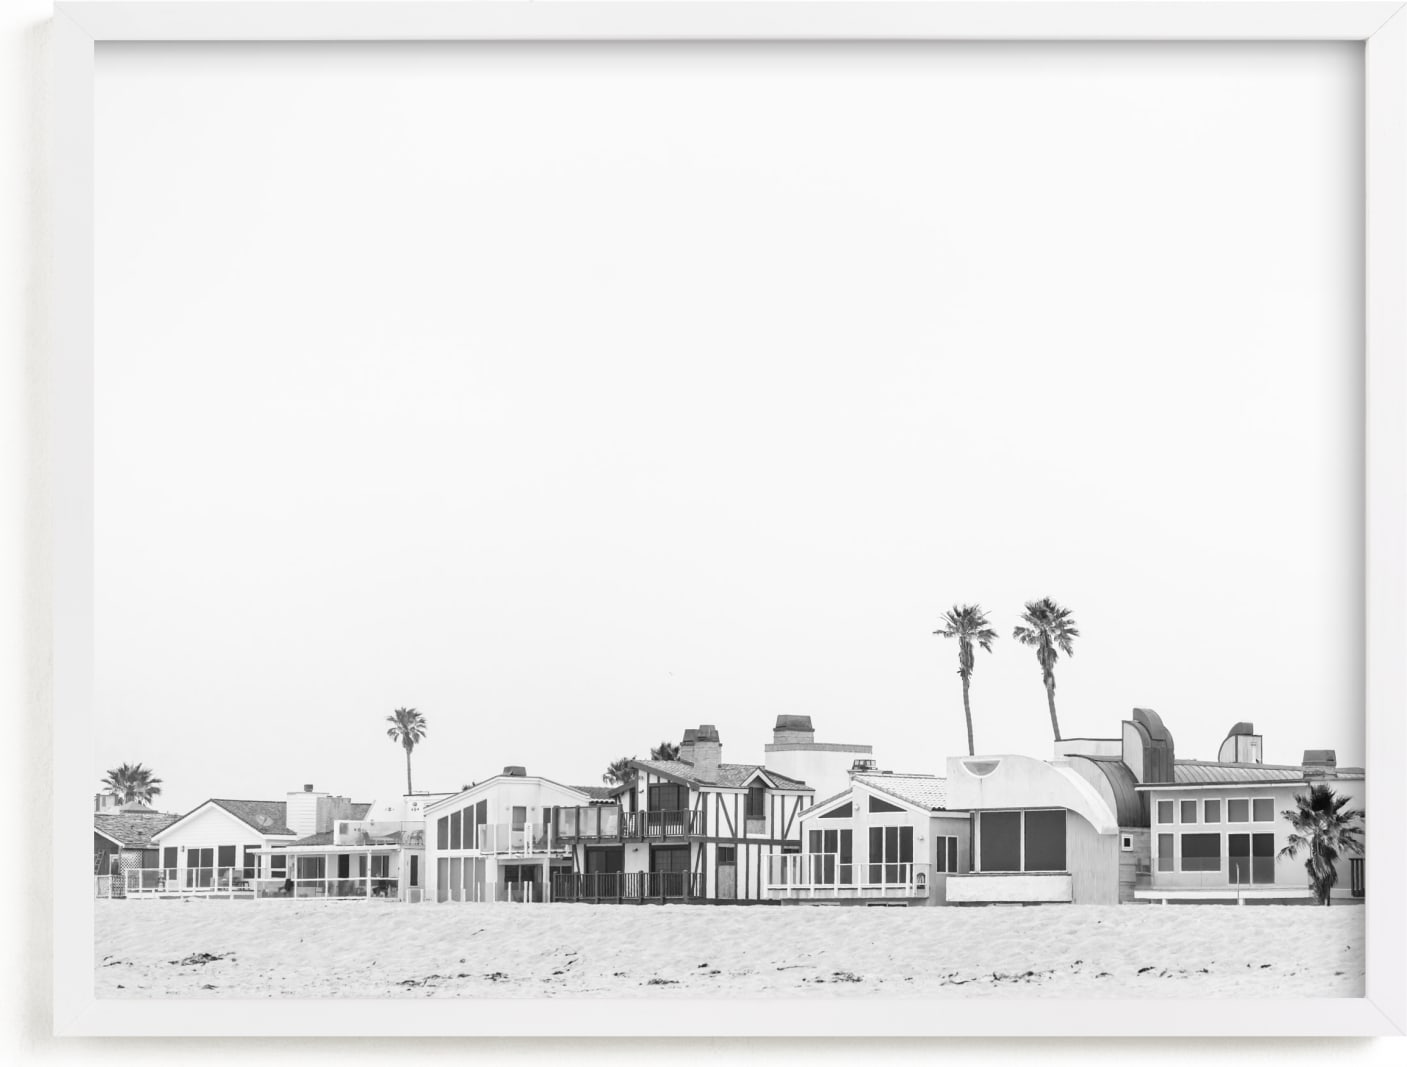 This is a black and white art by Kamala Nahas called Beach Houses.